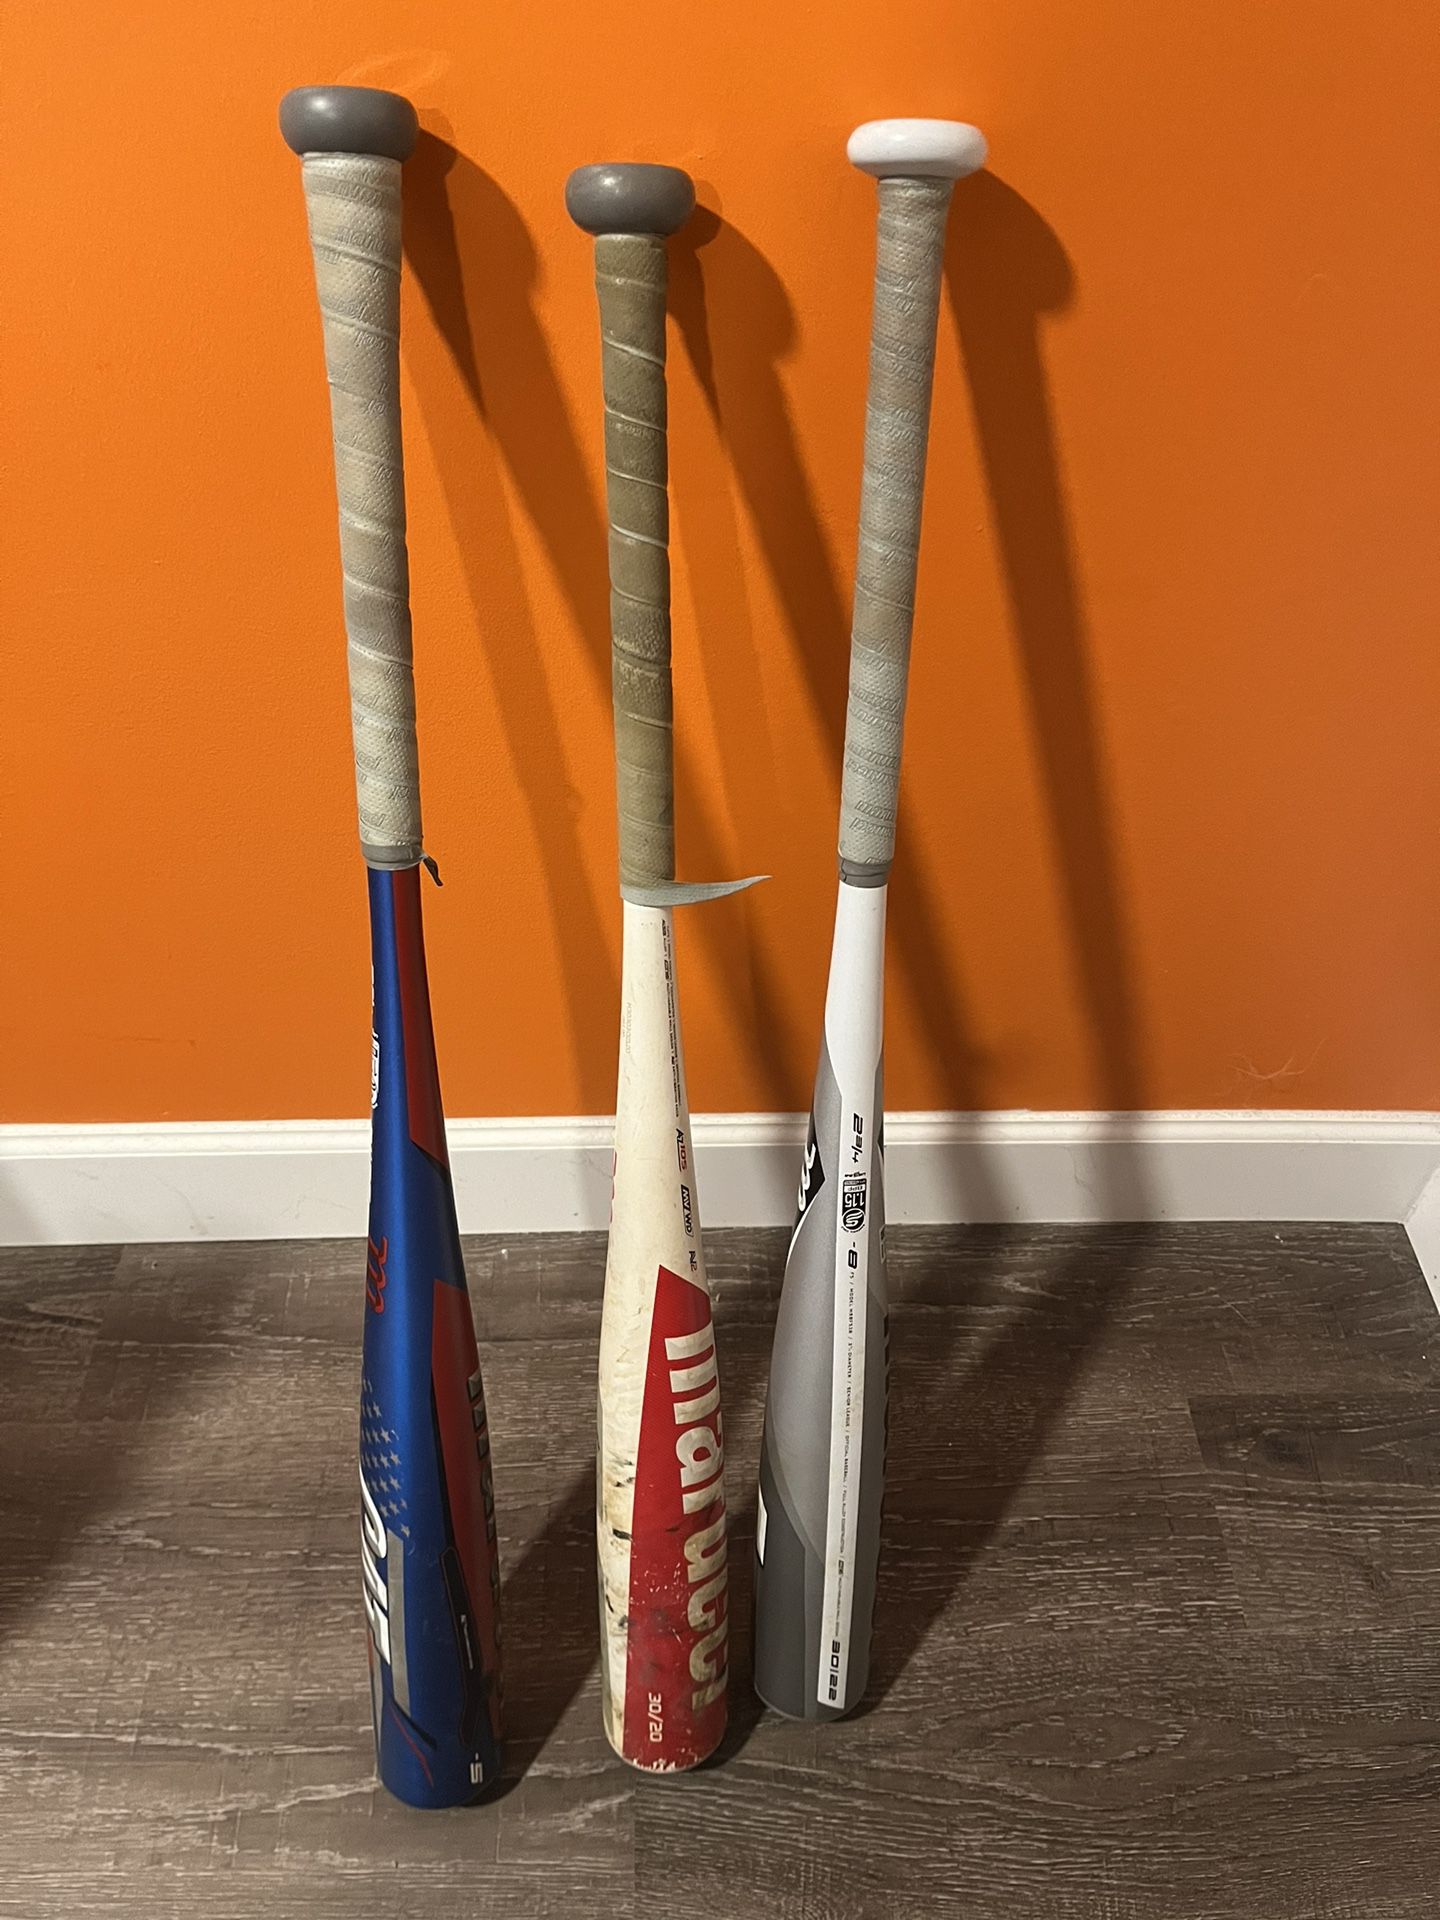 Used Bats For Sale - Negotiable